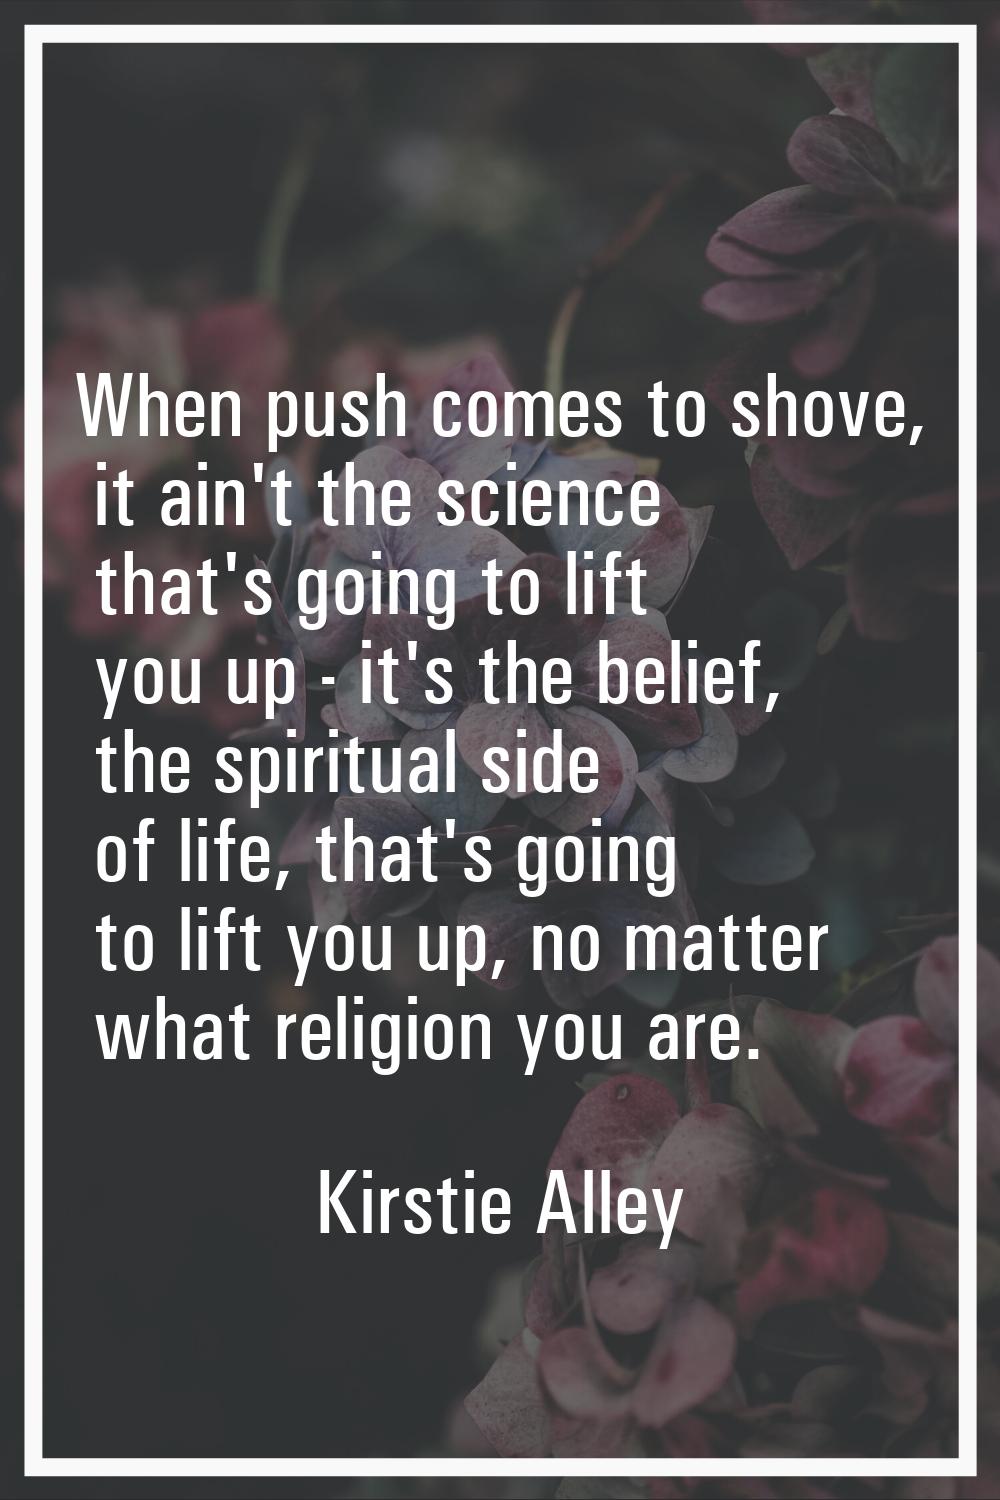 When push comes to shove, it ain't the science that's going to lift you up - it's the belief, the s